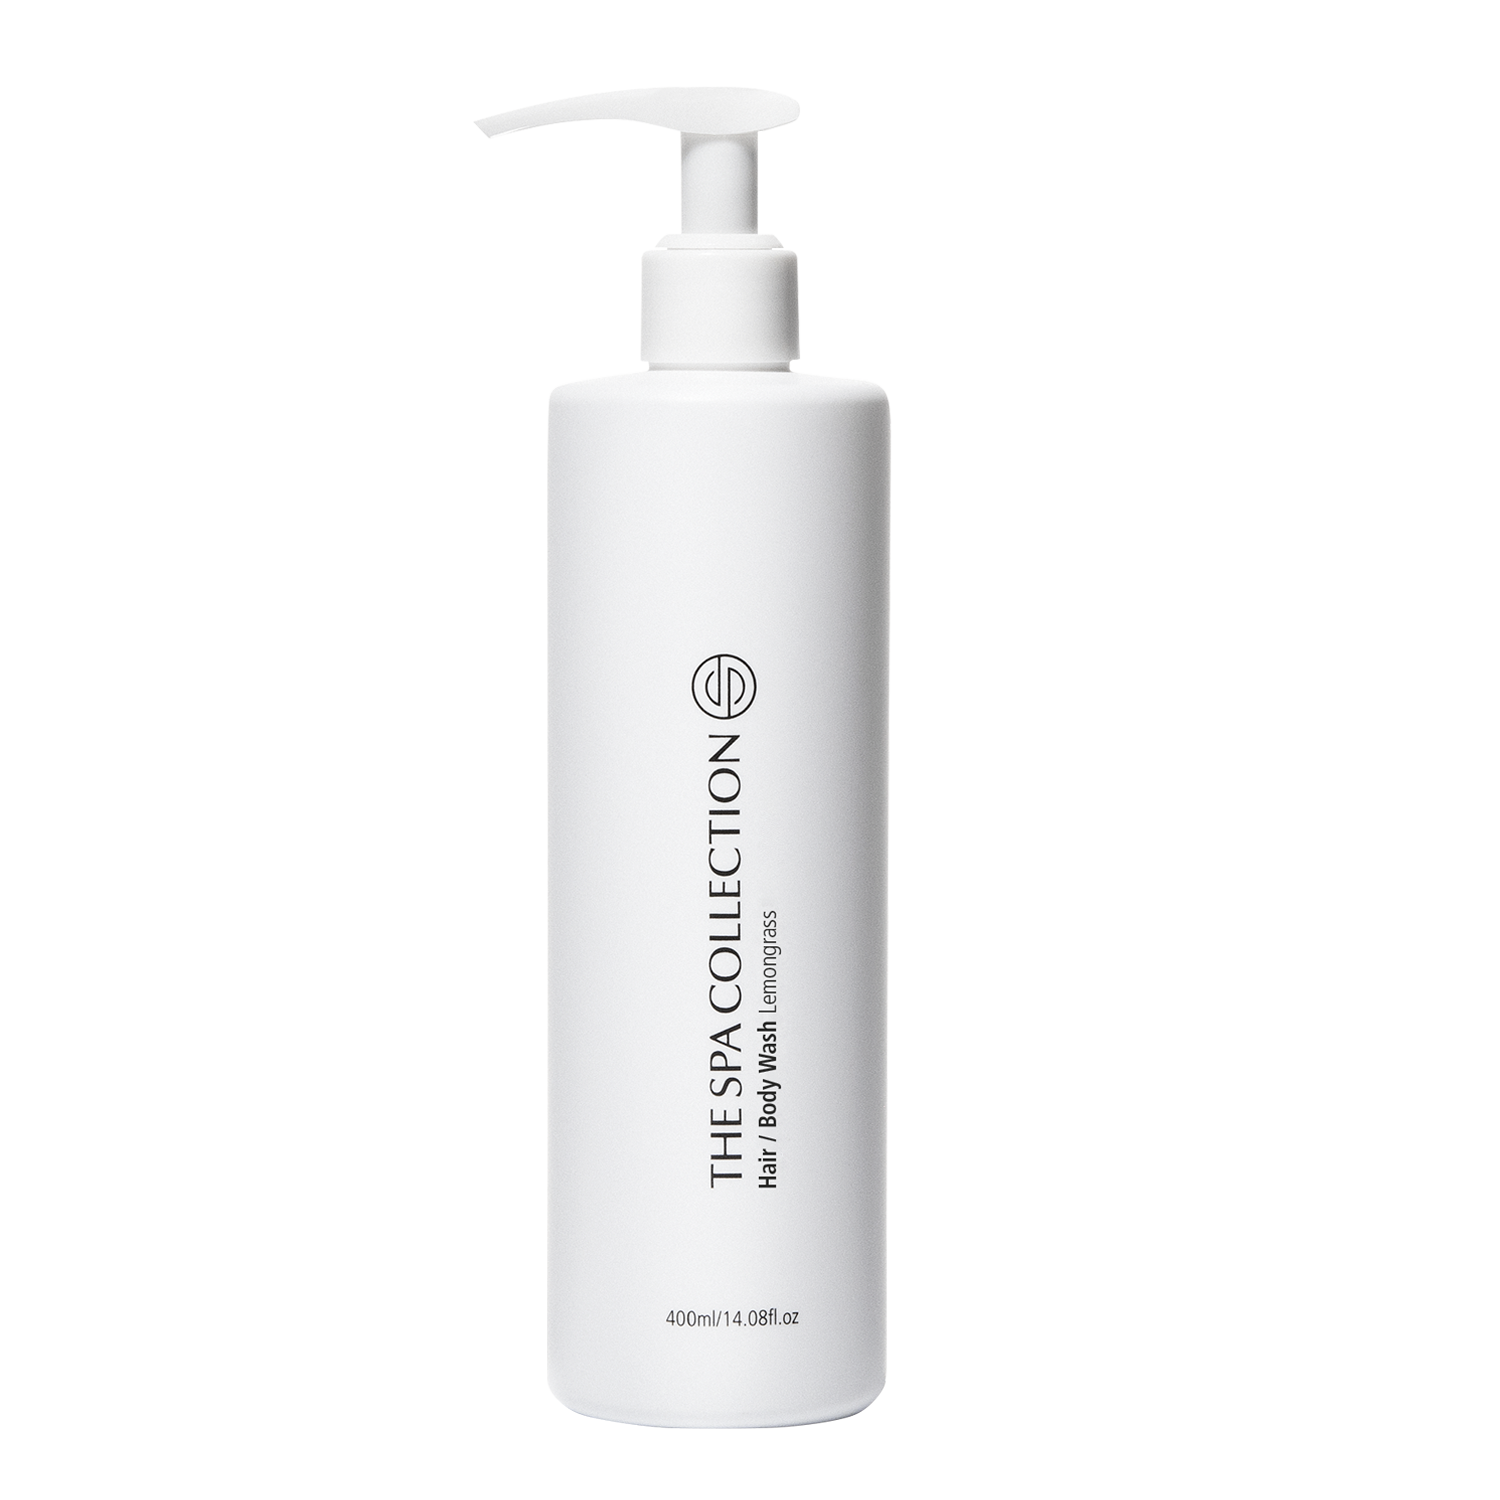 Luxurious Hair & body wash in Lemongrass Fragrance in a 400ml white, modern bottle by The Spa Collection